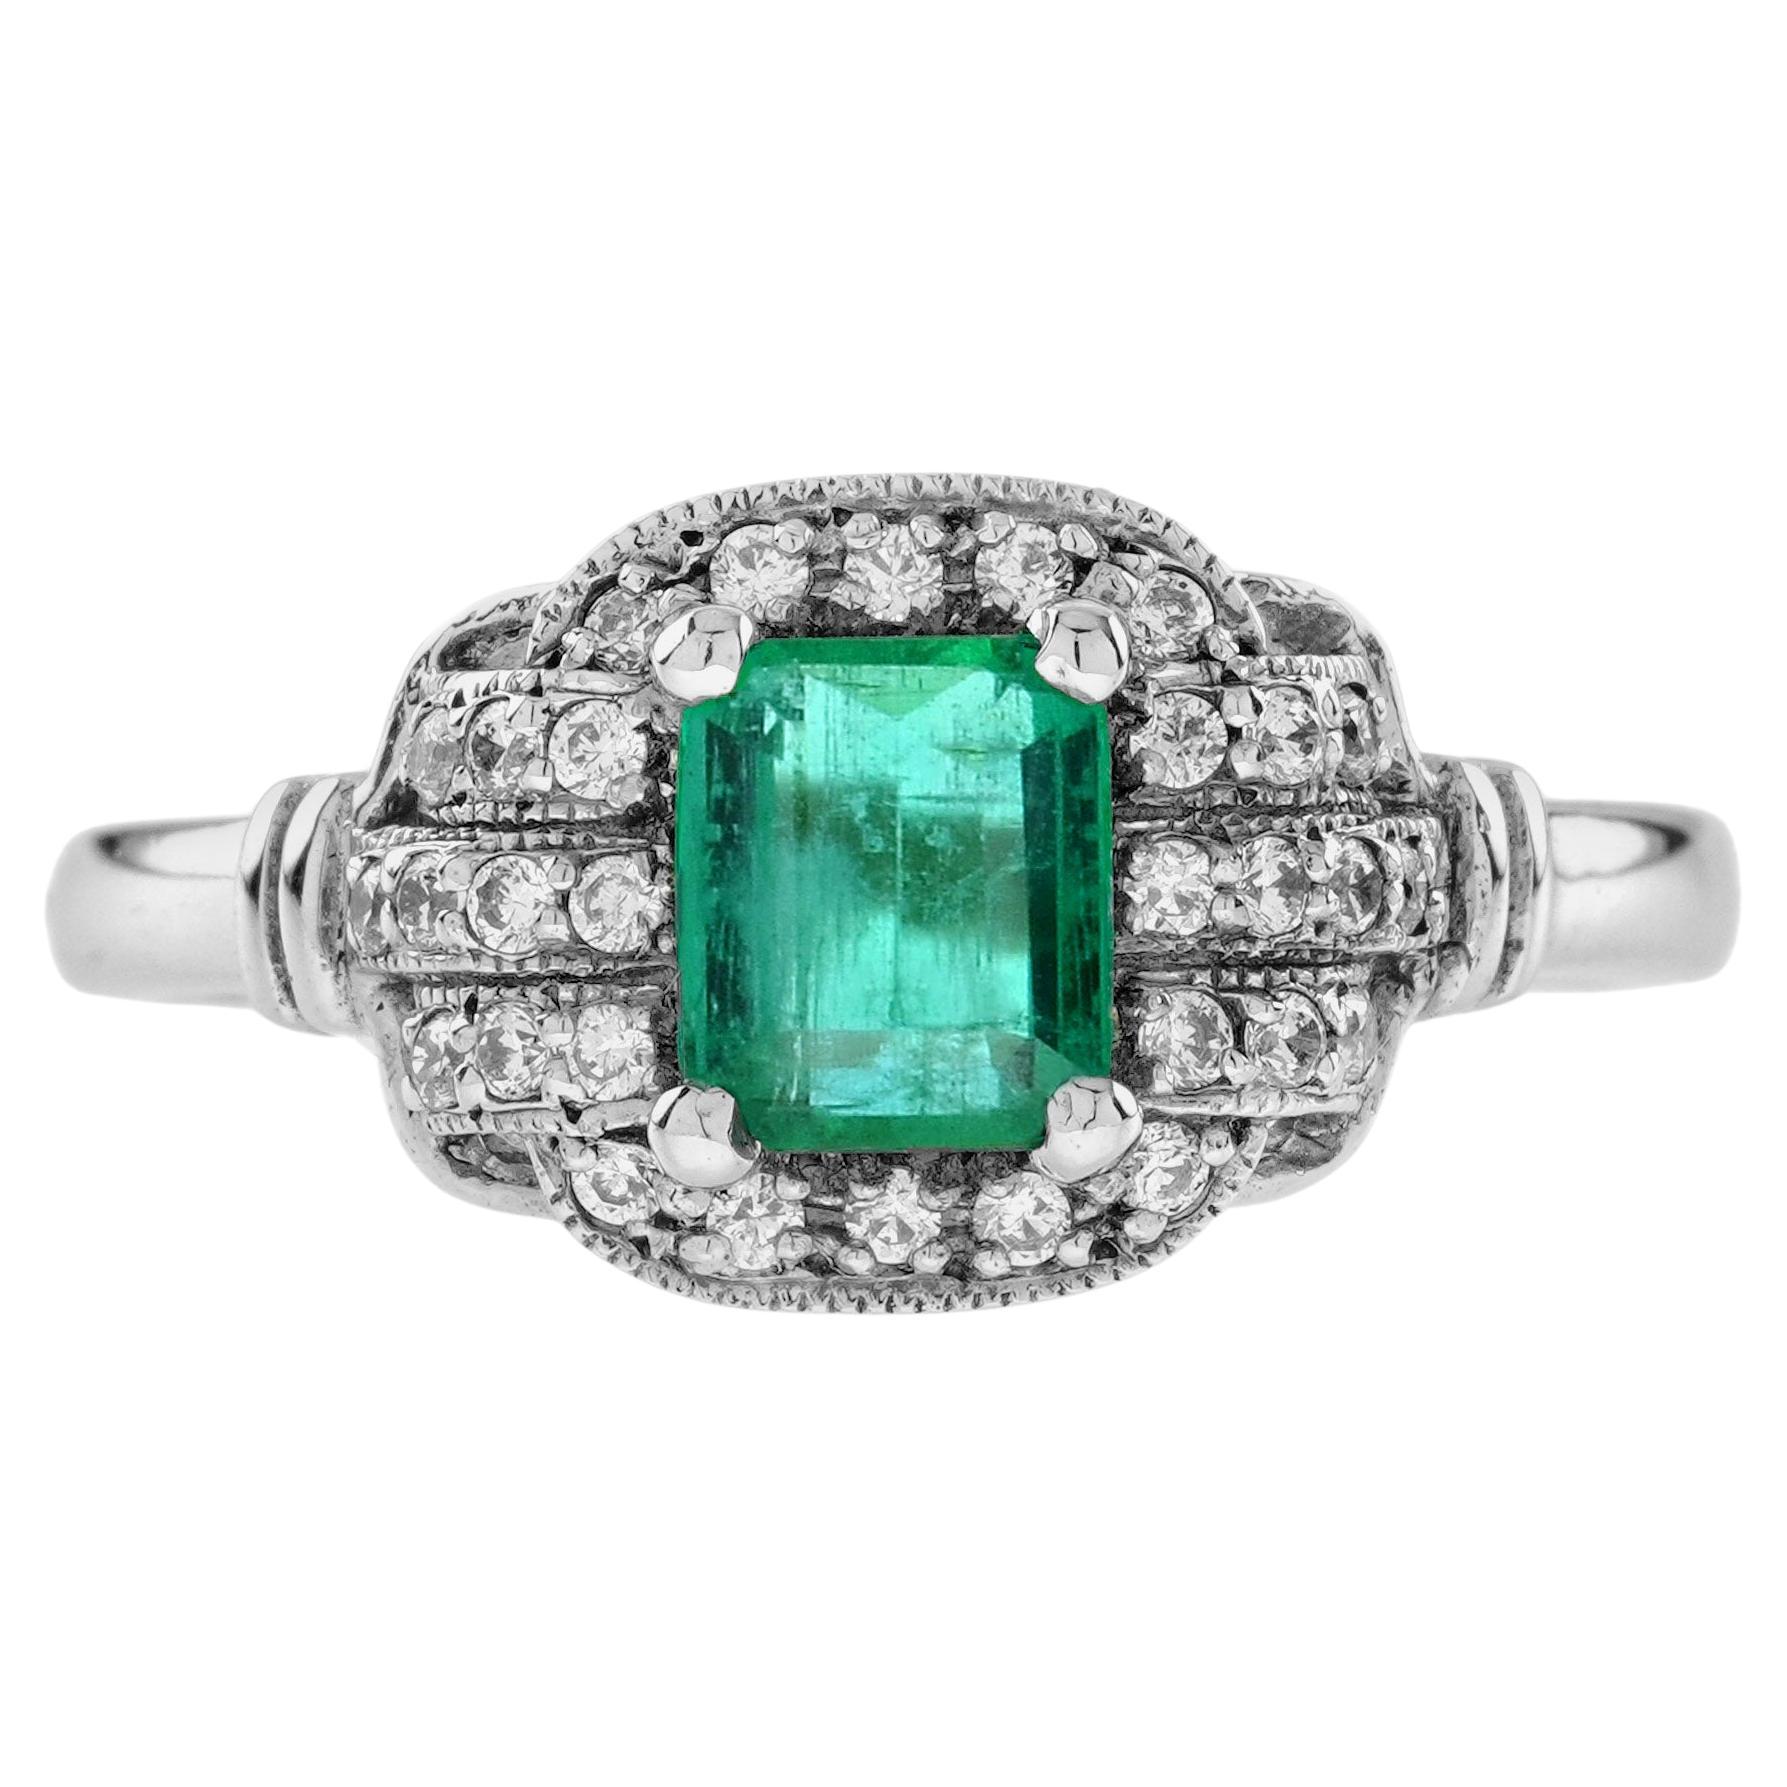 Emerald and Diamond Art Deco Style Halo Engagement Ring in 18K White Gold